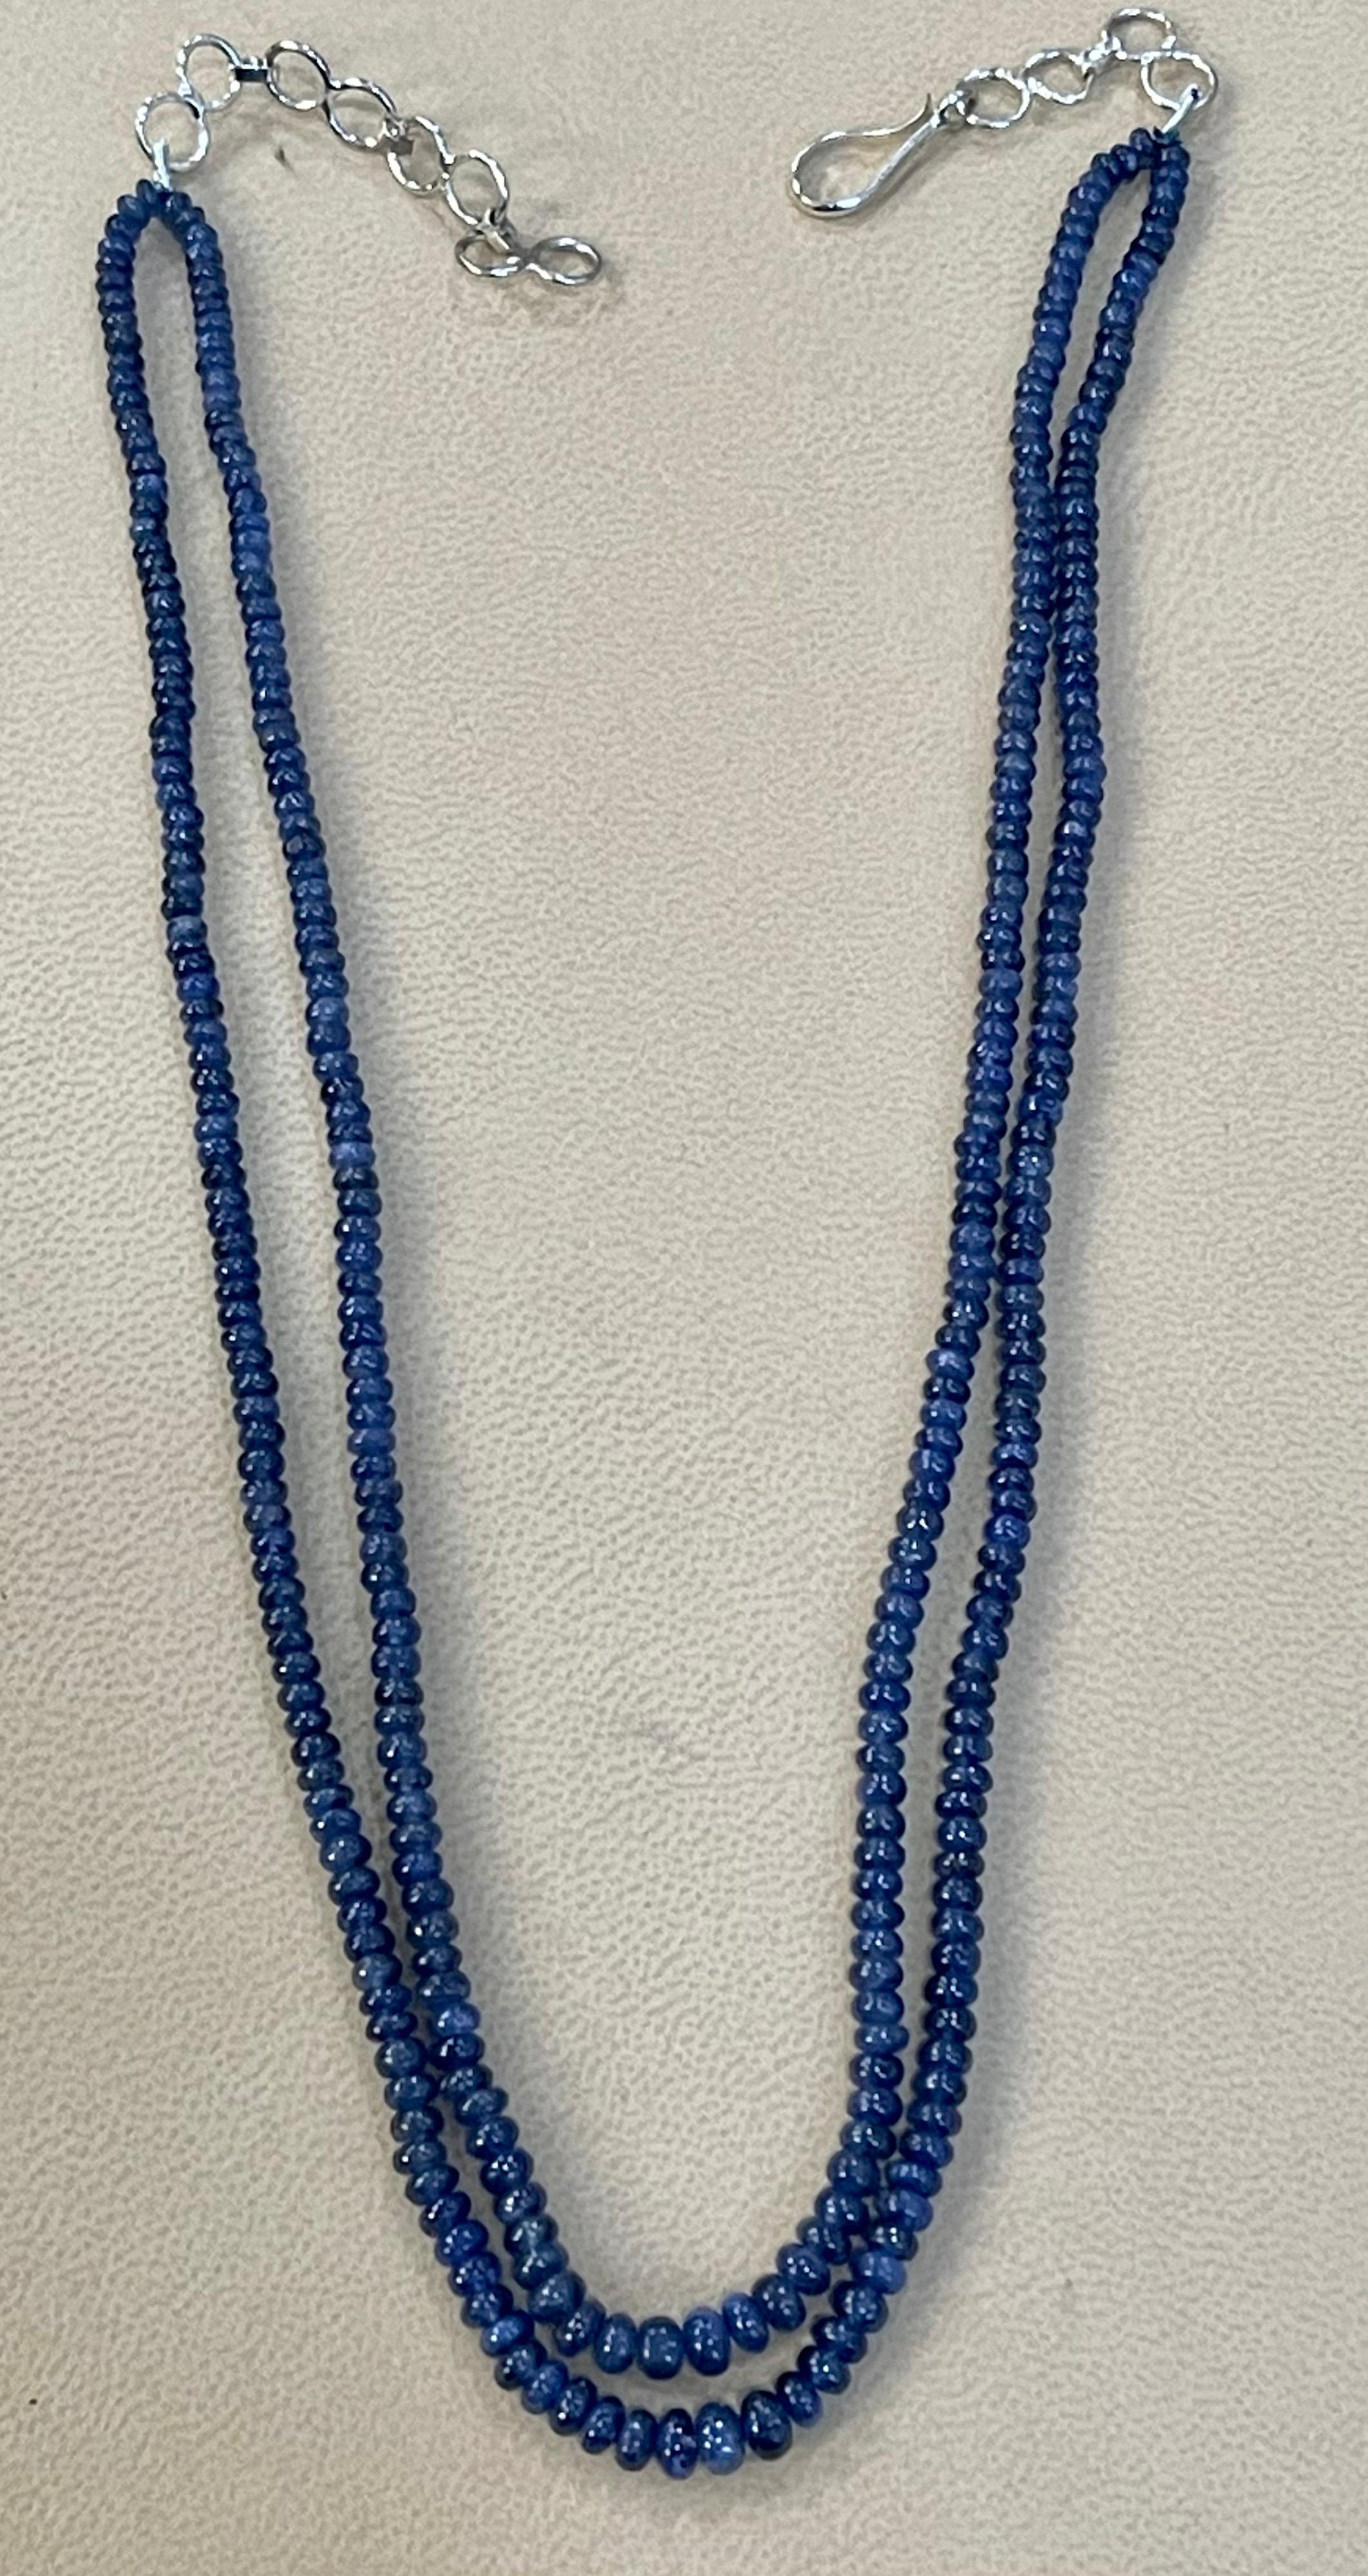 105 Carat Natural Sapphire Bead Two-Strand Necklace Sterling Silver Clasp For Sale 2